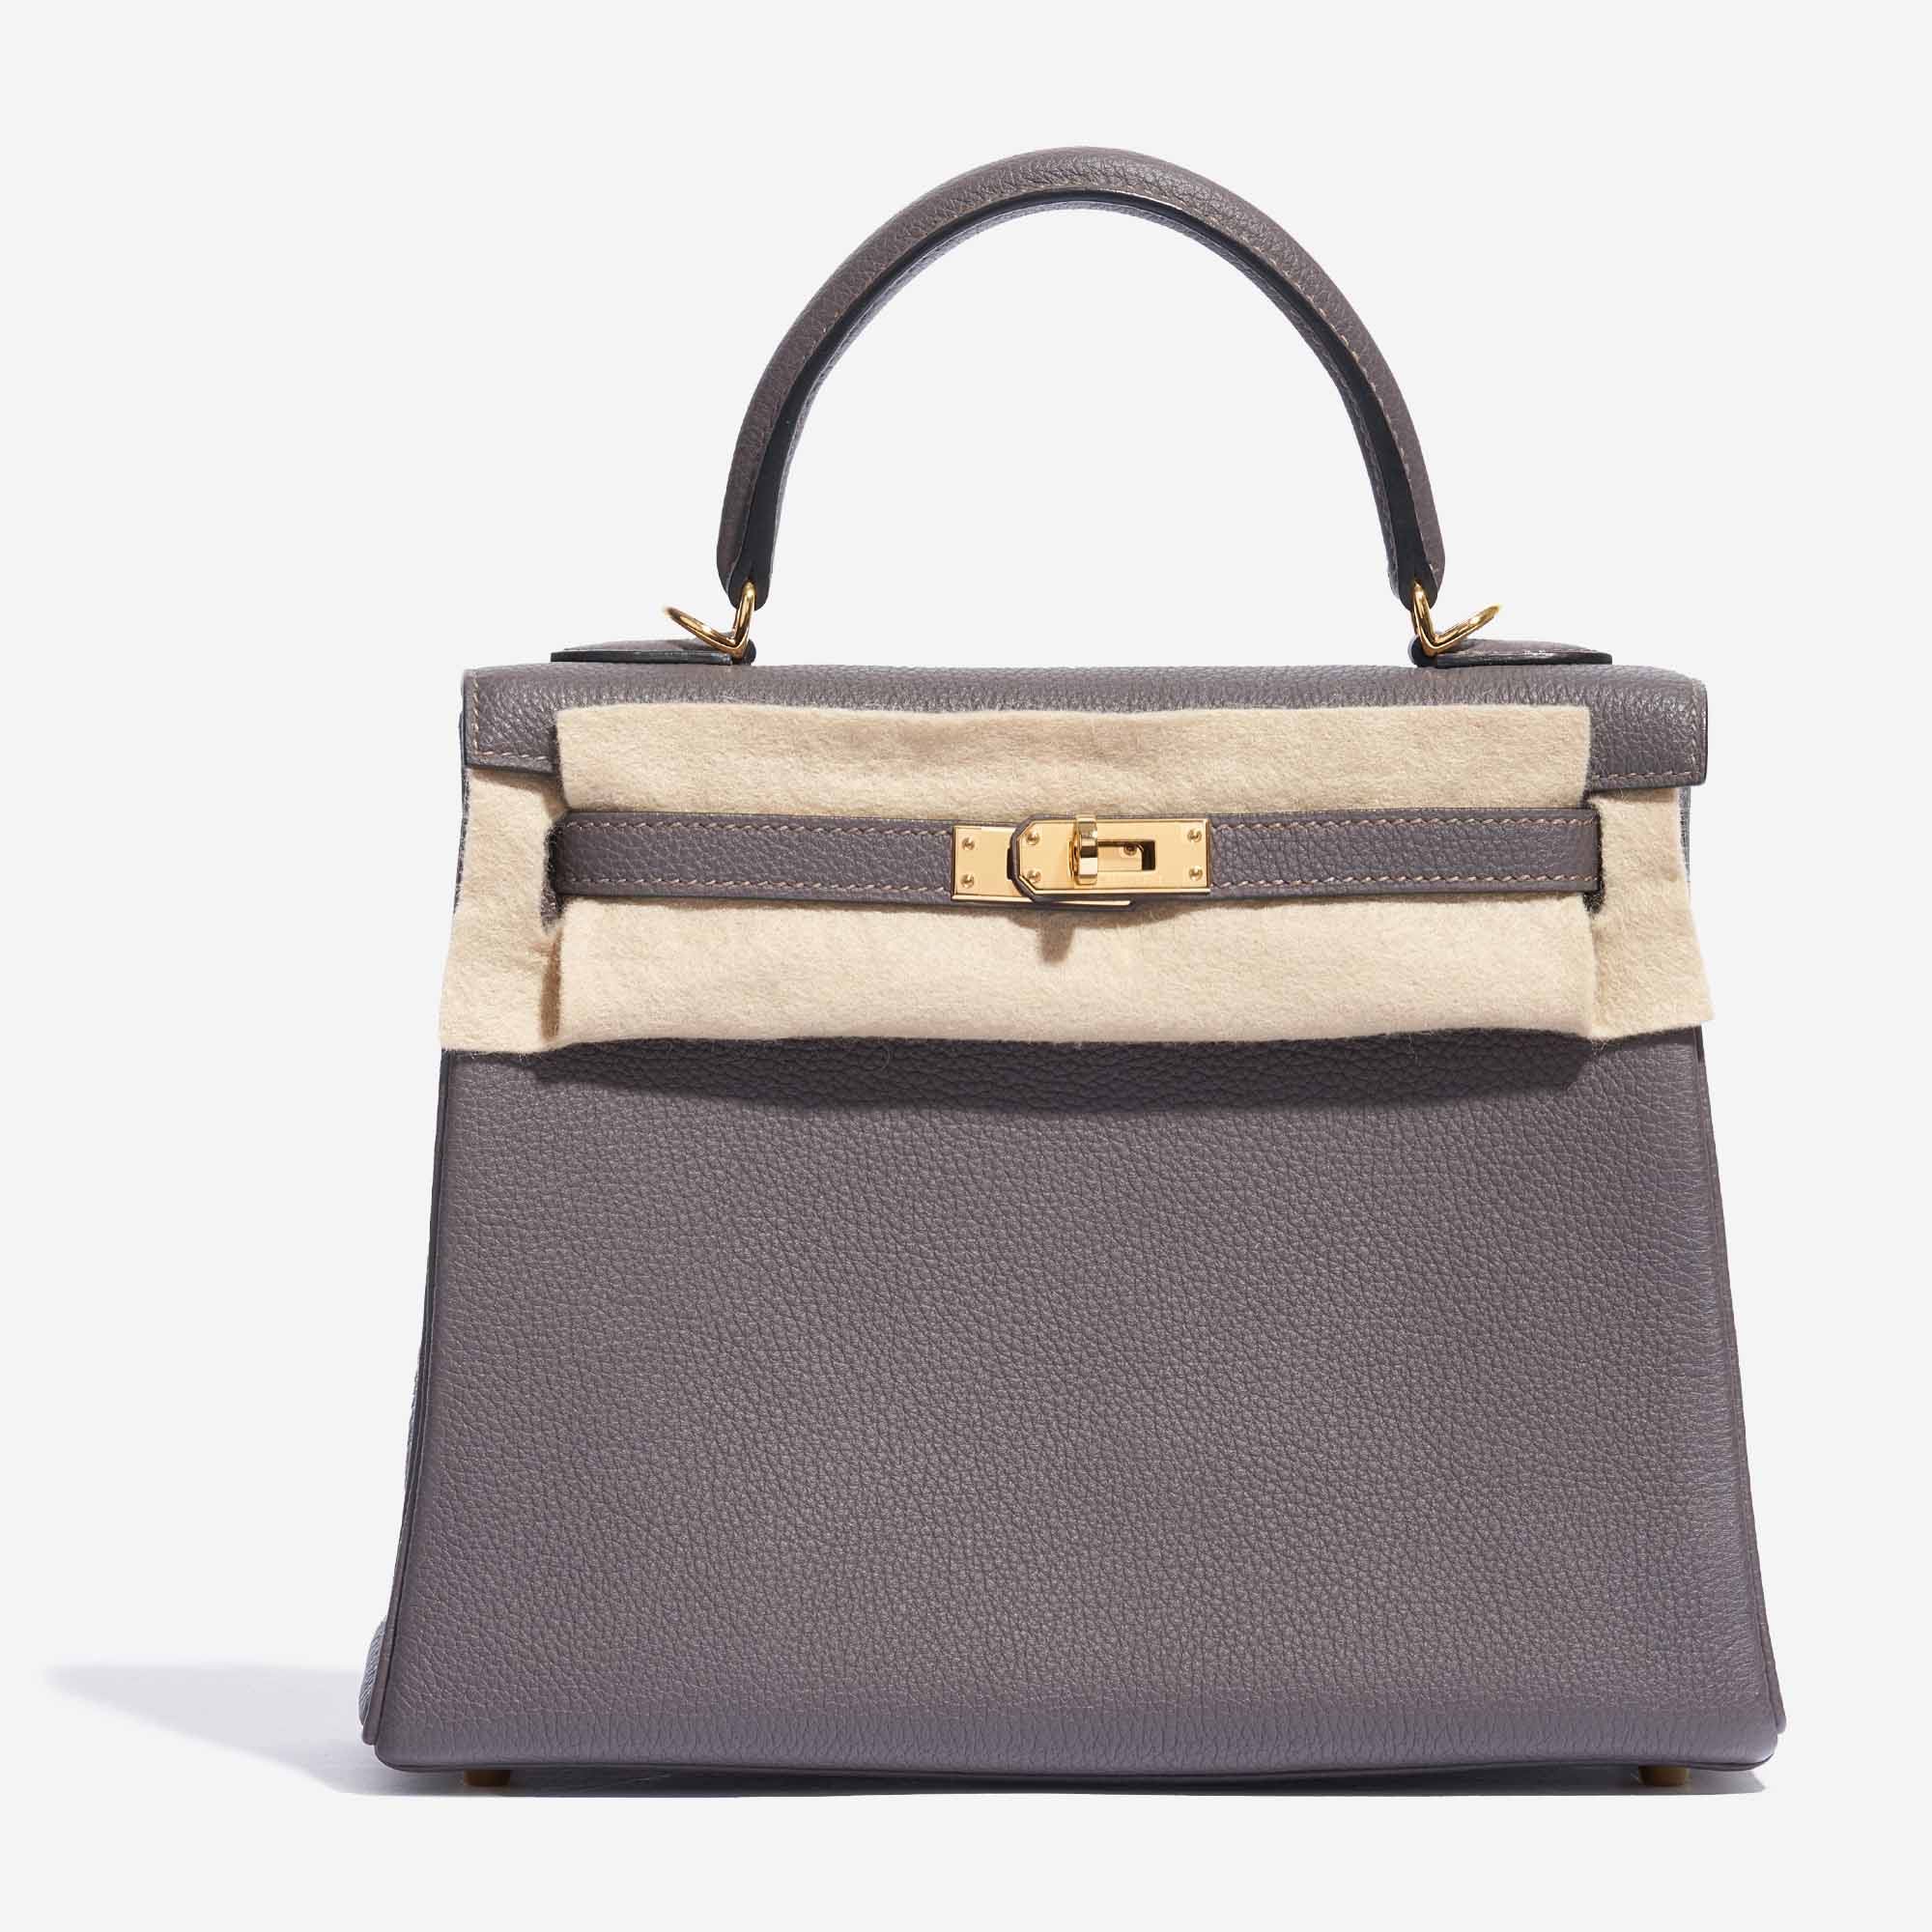 Deco. Shop - New in➕💕 Hermes Kelly 25 Gris Etain Togo Leather GHW